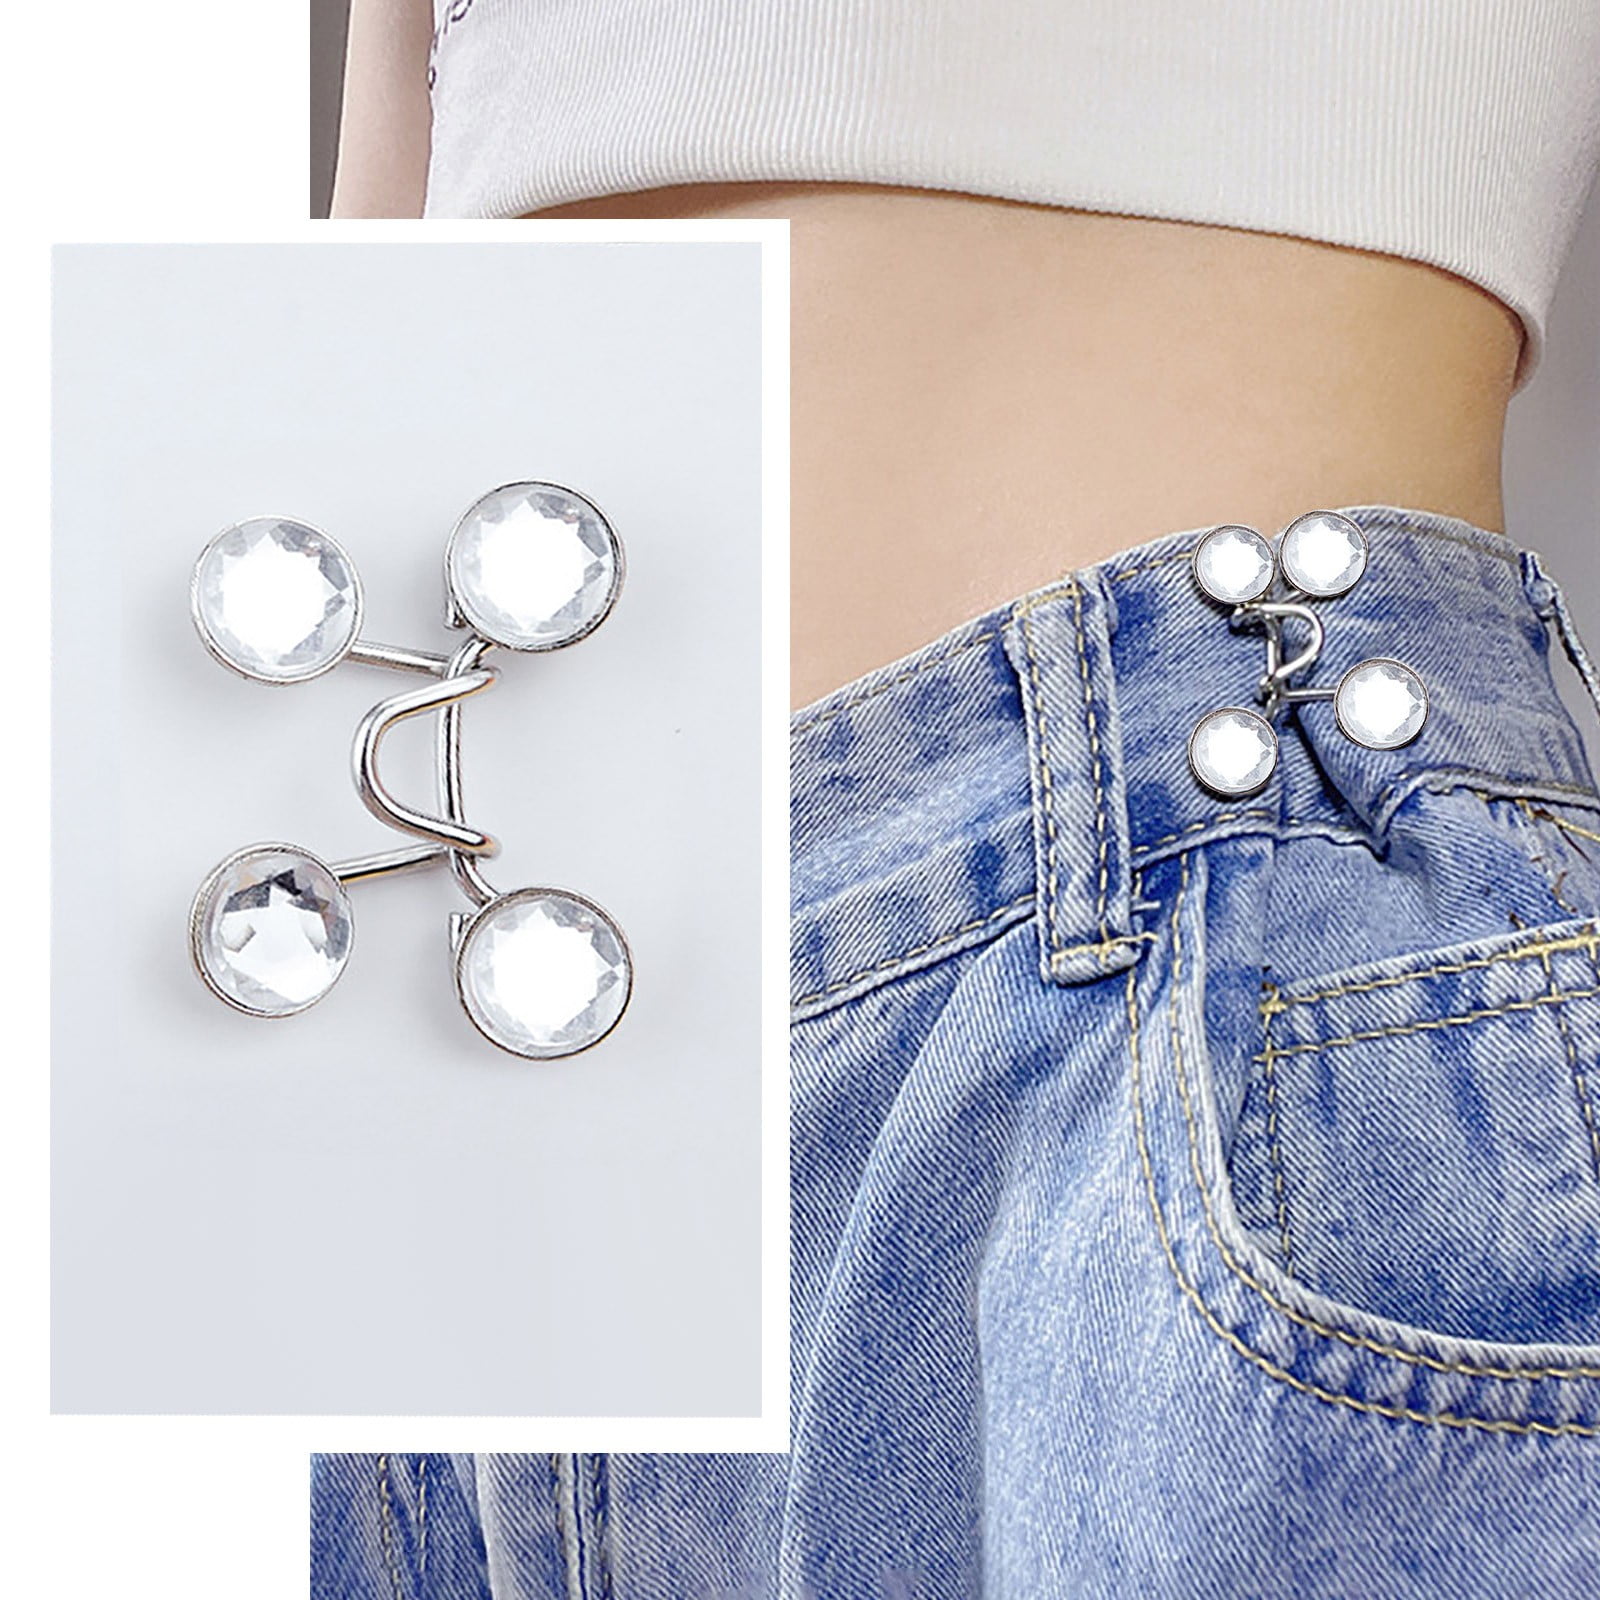 4pcs Pant Waist Tightener, Daisy Jeans Waist Button Pin Pants Clips Waist  Buckle Adjuster Buttons for Loose Jeans Pants Skirts No Sew and No Tools